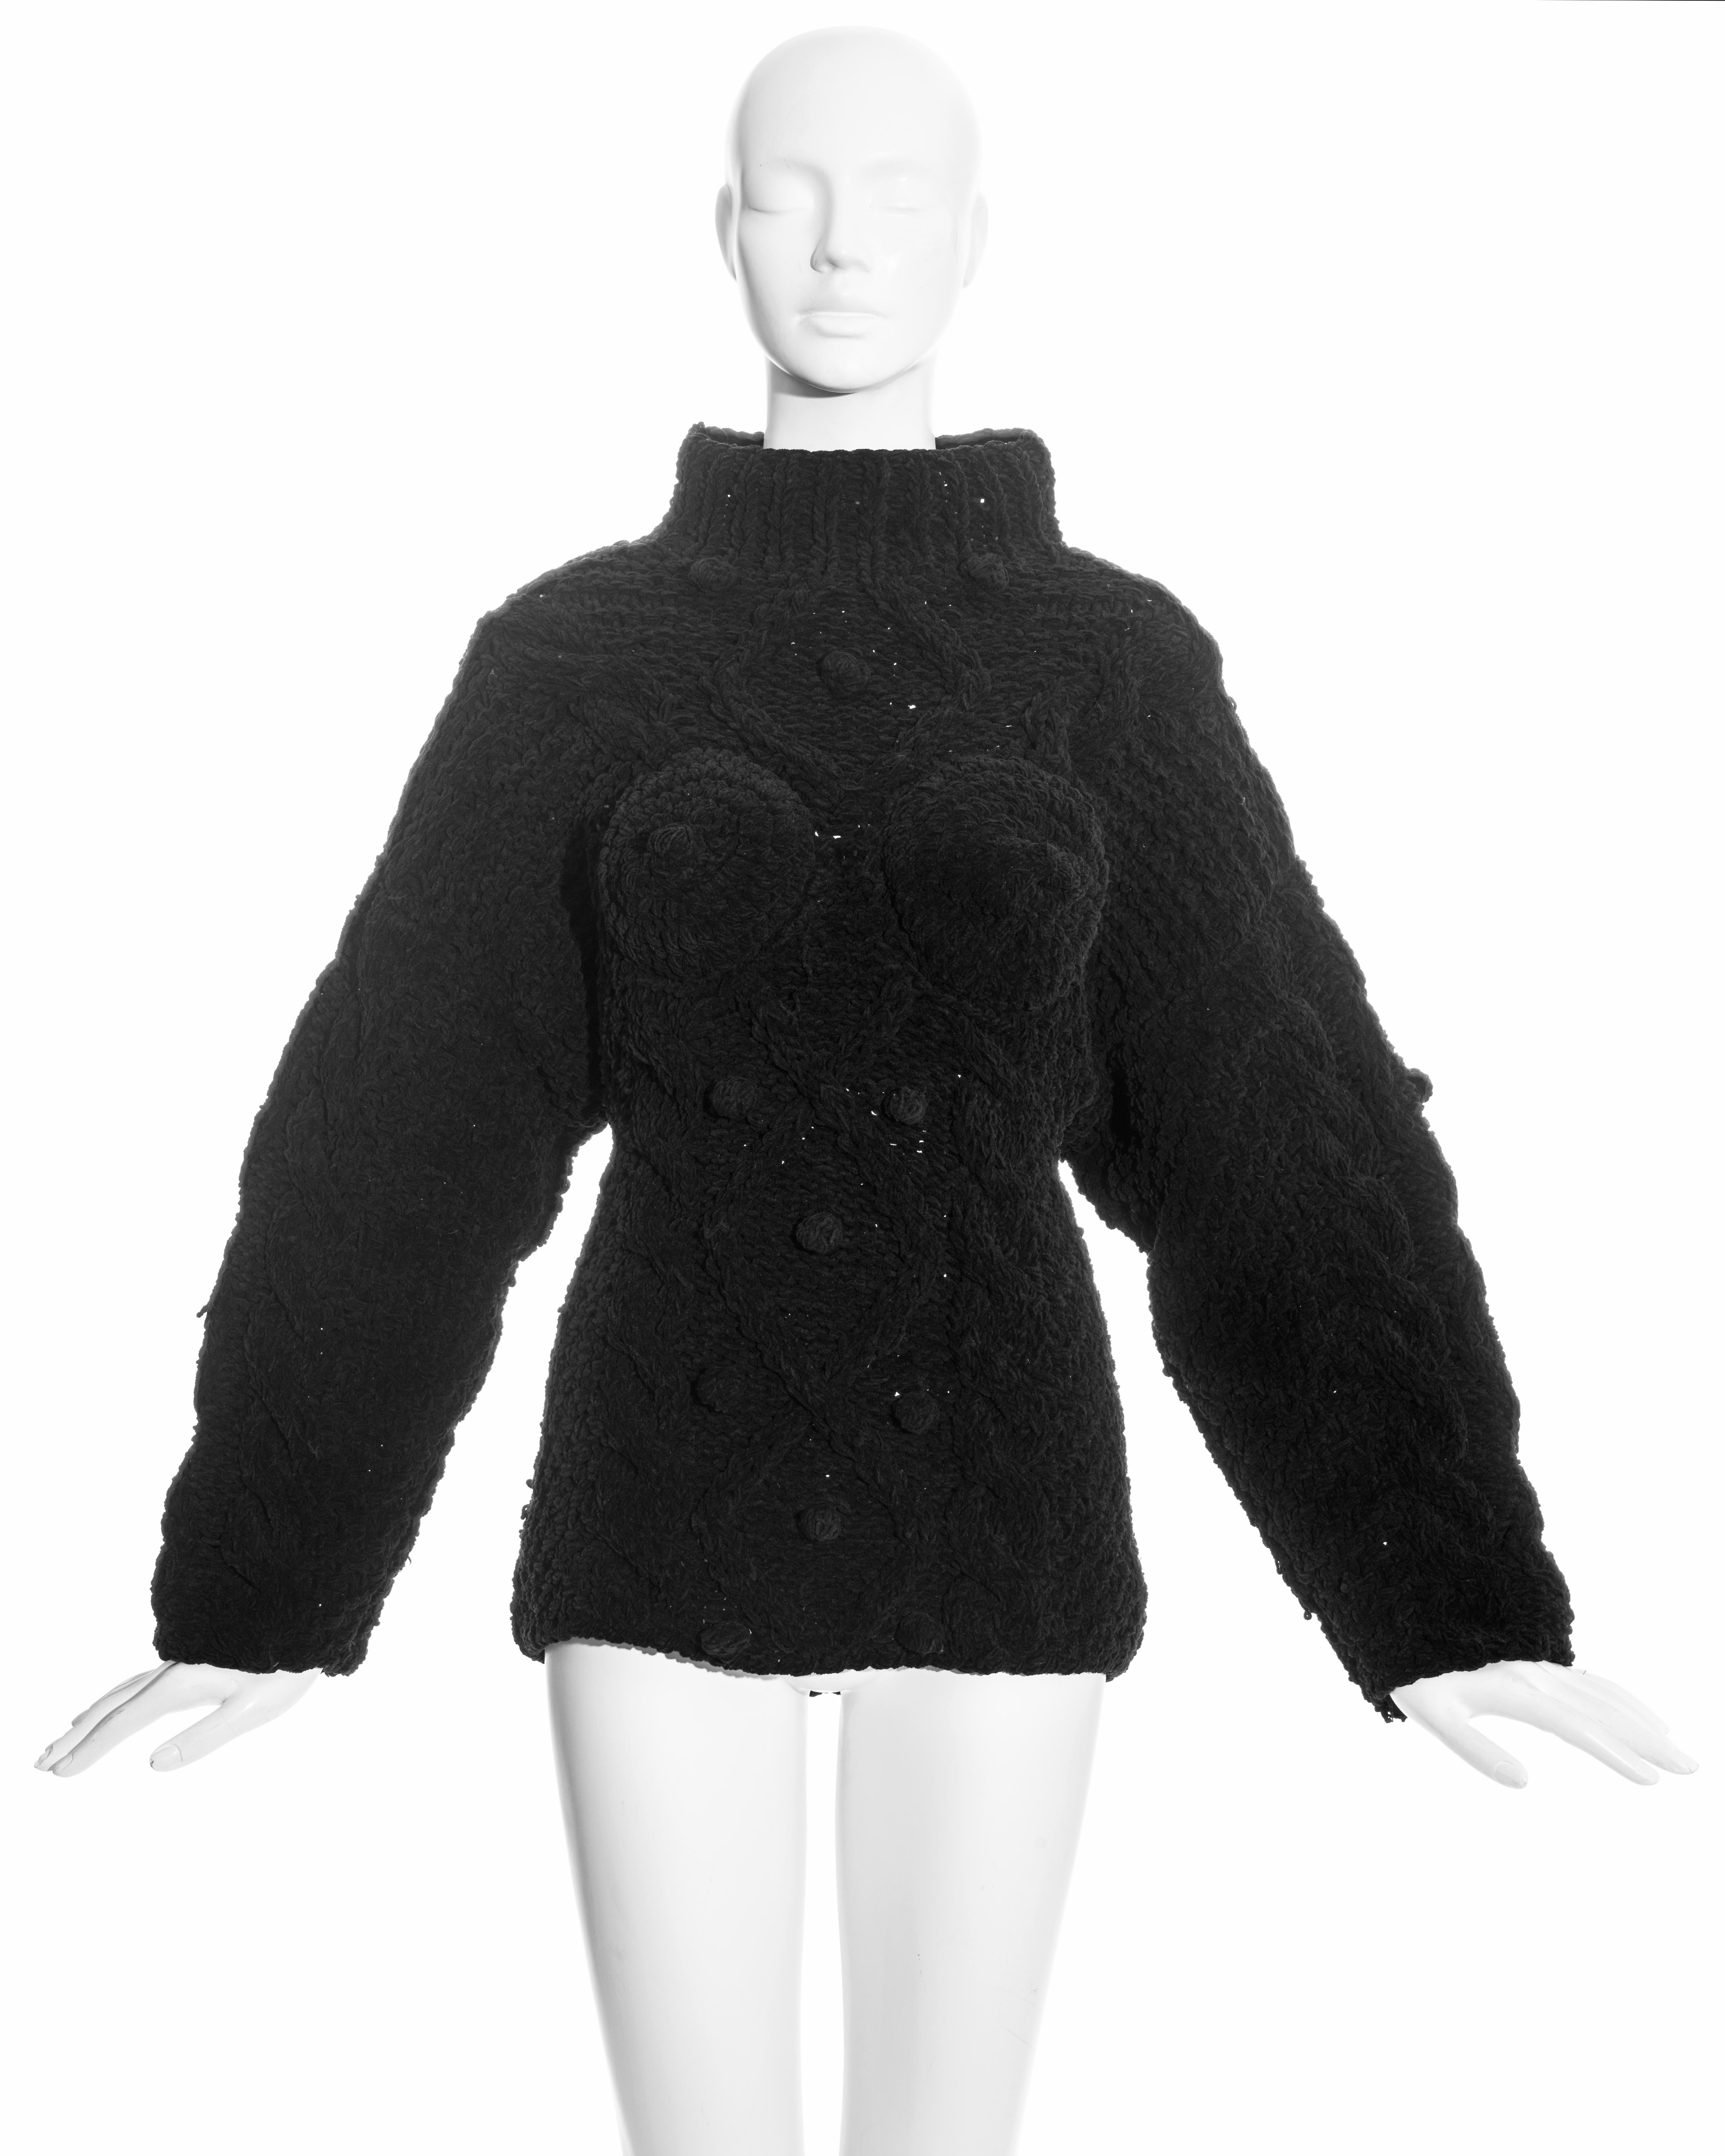 Jean Paul Gaultier black knitted chenille aran conical breast sweater, fw 1985 In Excellent Condition For Sale In London, GB